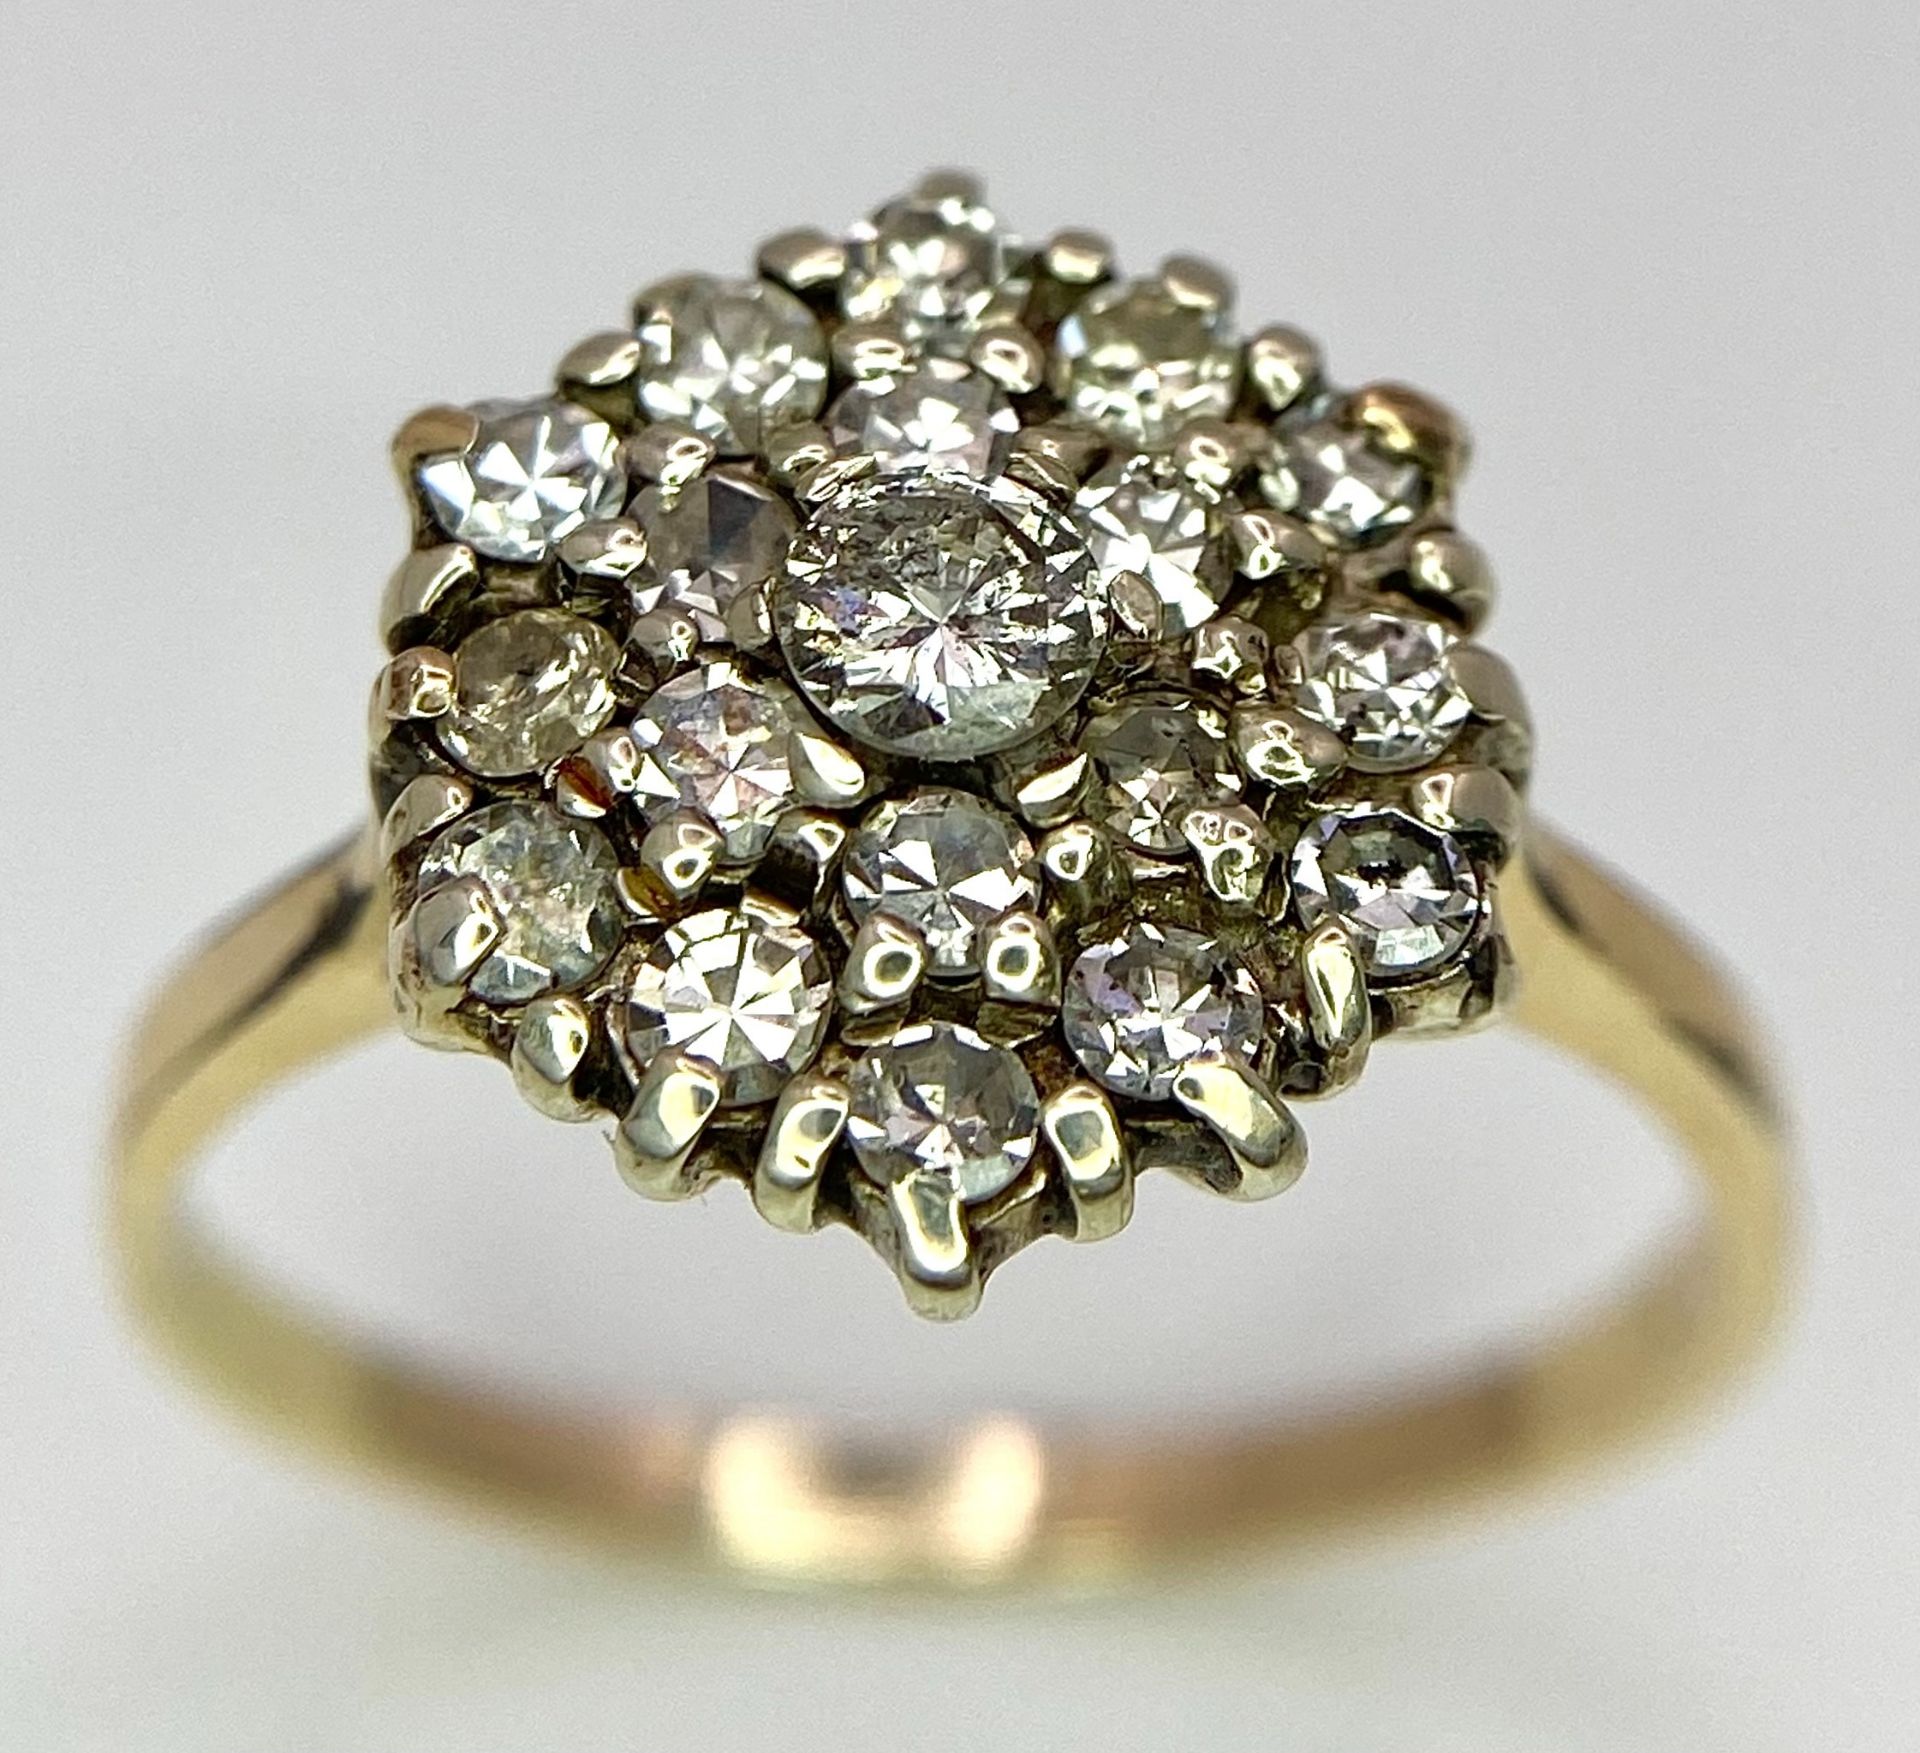 A 9K YELLOW GOLD DIAMOND CLUSTER RING. 0.50CT. 2.4G. SIZE M.